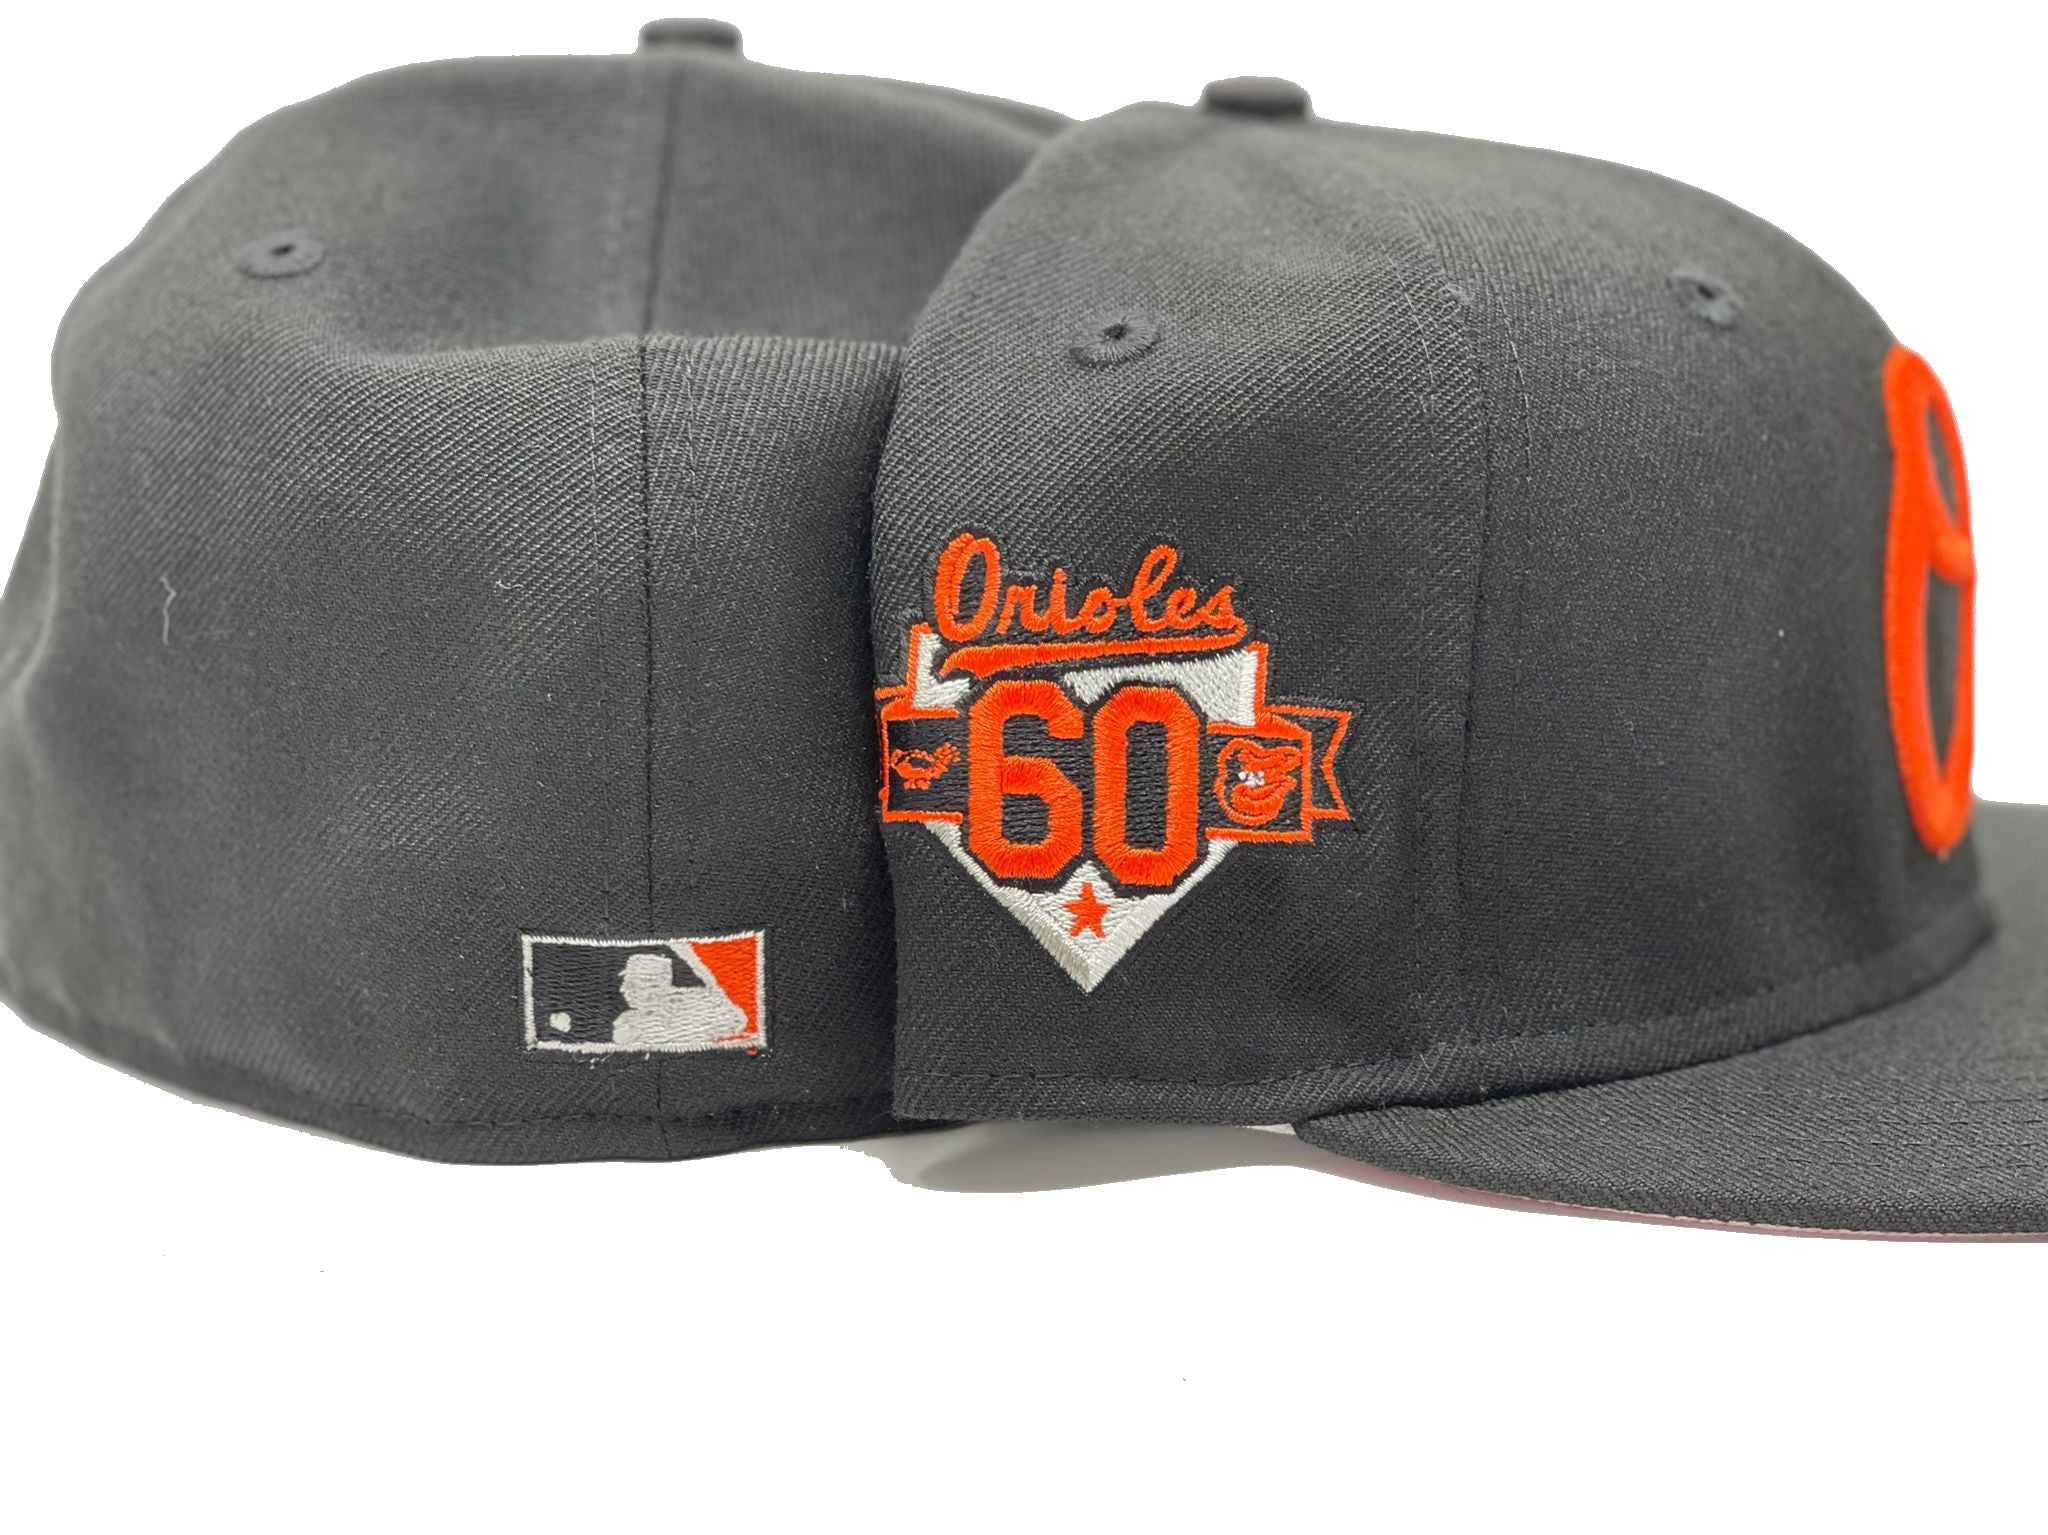 Baltimore Orioles 60th Anniversary and Commemorative Patch